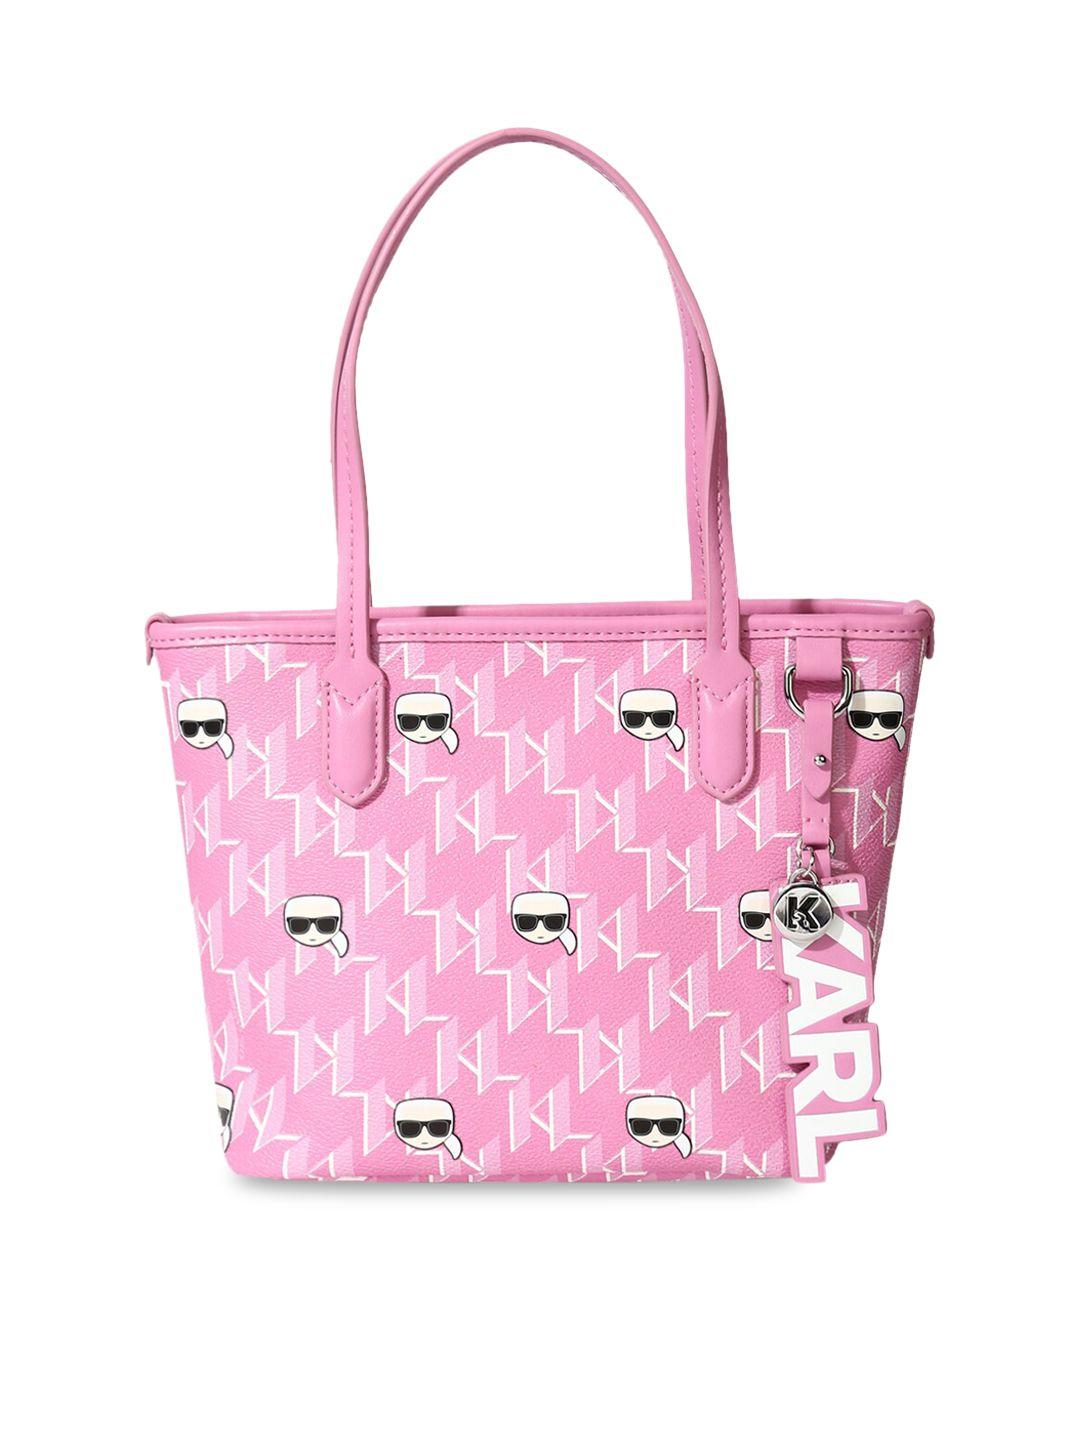 karl lagerfeld pink leather small shopper tote bag